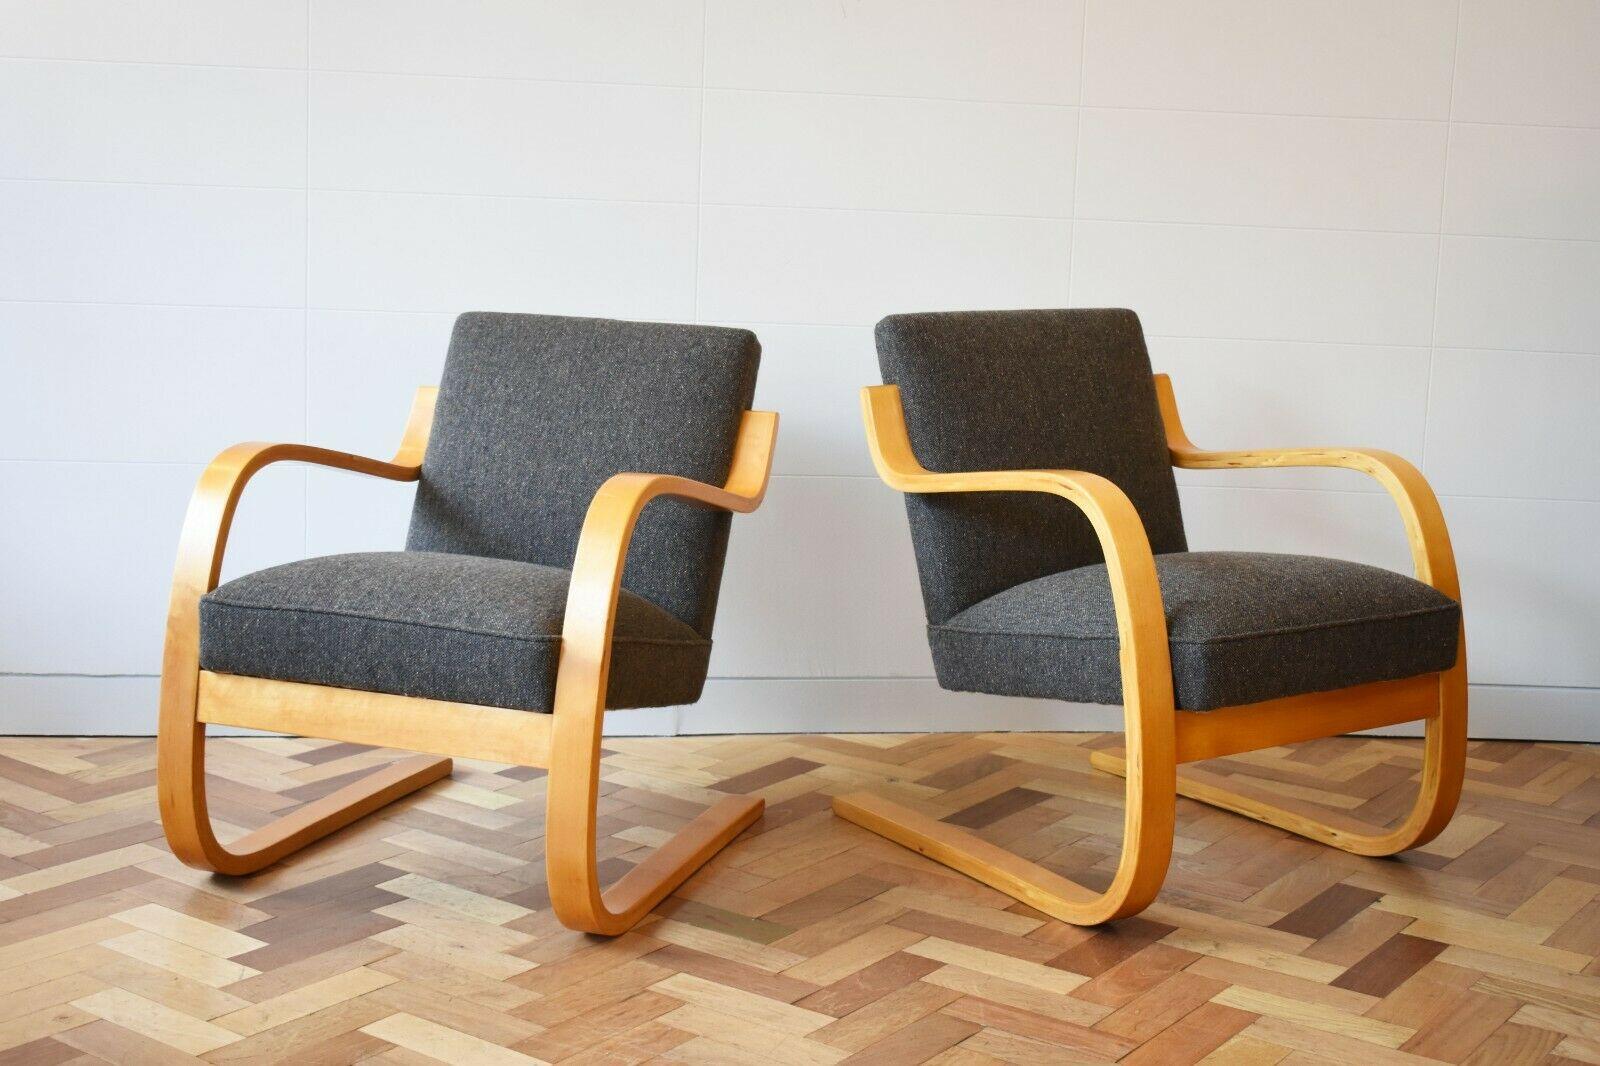 With bent beechwood sculptural frame and cantilevered wooden design, these chairs are a classic Aalto, encapsulating the beauty of mid-Century modernism. 

They armchairs have been newly upholstered in Gerd Hay-Edies Mourne grey fabric. Created by